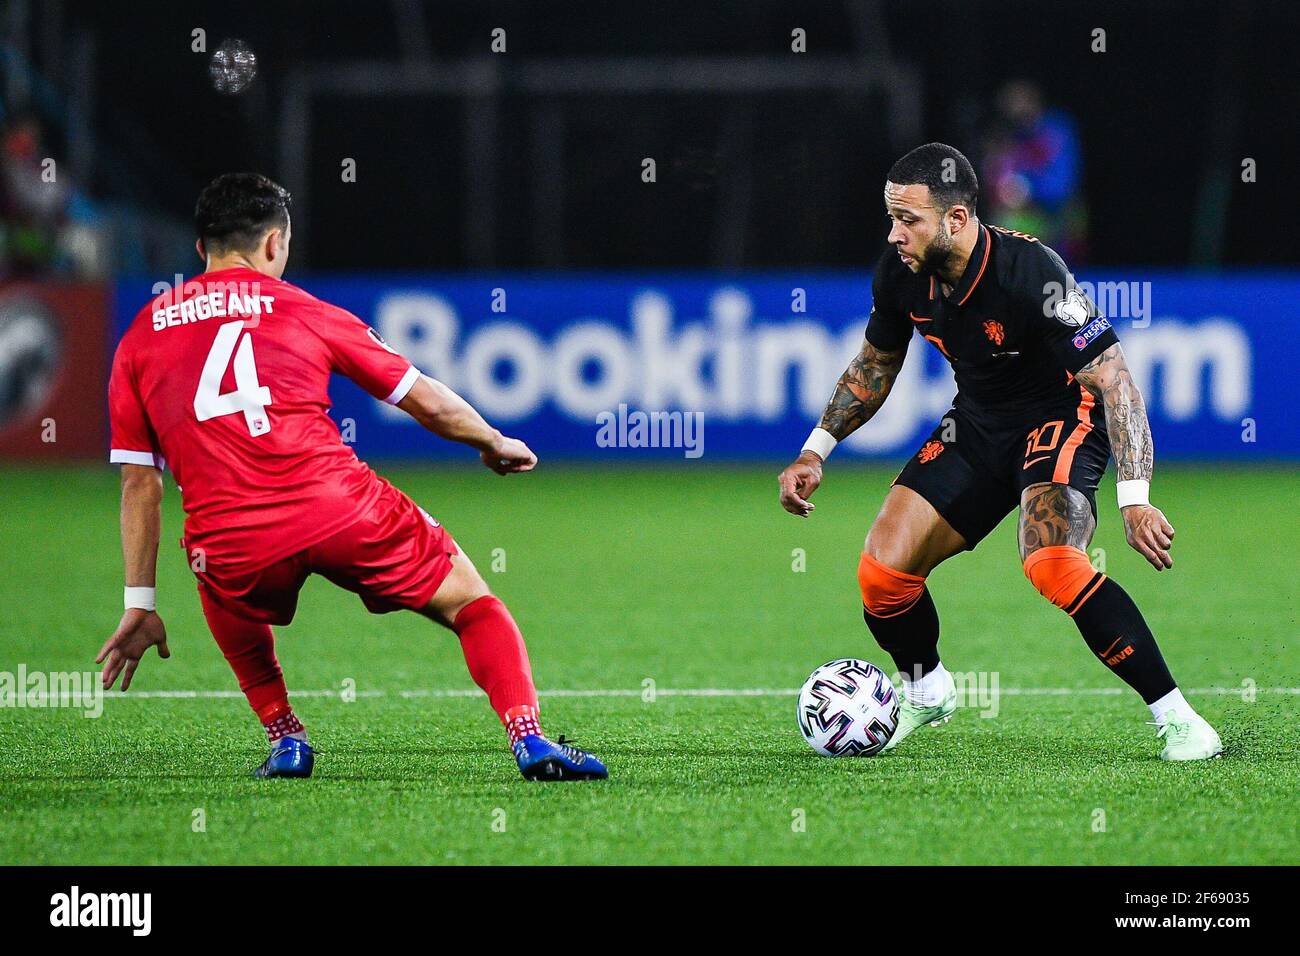 GIBRALTAR, GIBRALTAR - MARCH 30: Jack Sergeant of Gibraltar, Memphis Depay of the Netherlands during the FIFA World Cup 2022 Qatar Qualifier match bet Stock Photo